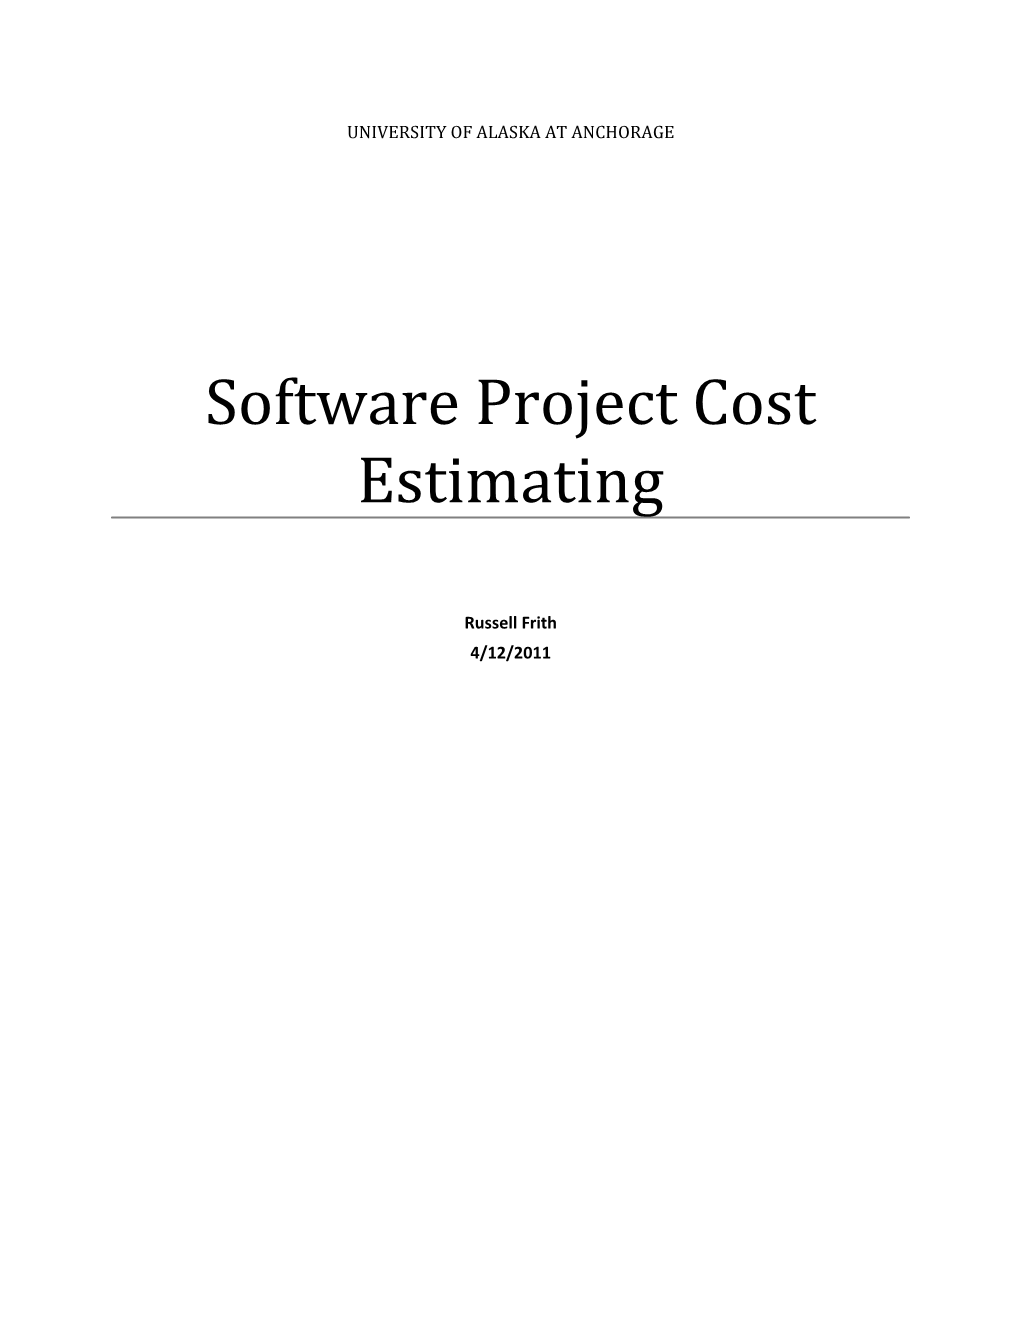 Software Project Cost Estimating